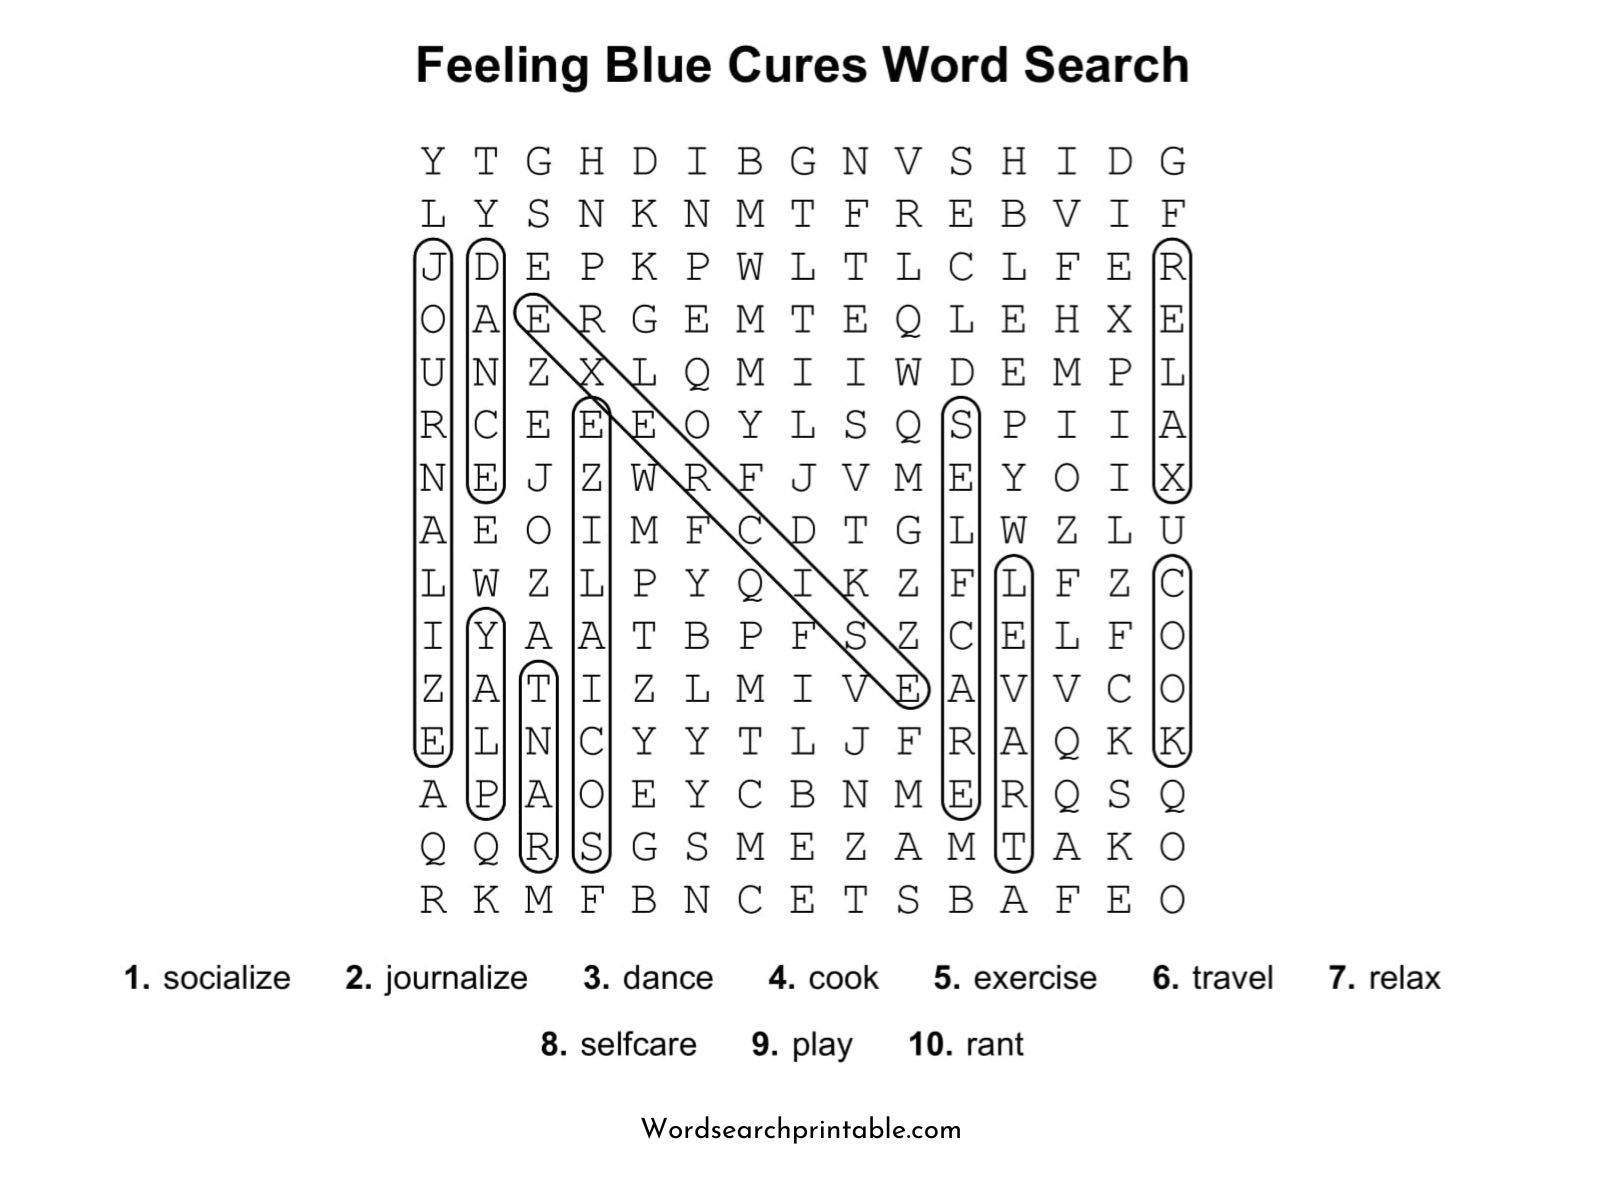 feeling blue cures word search puzzle solution